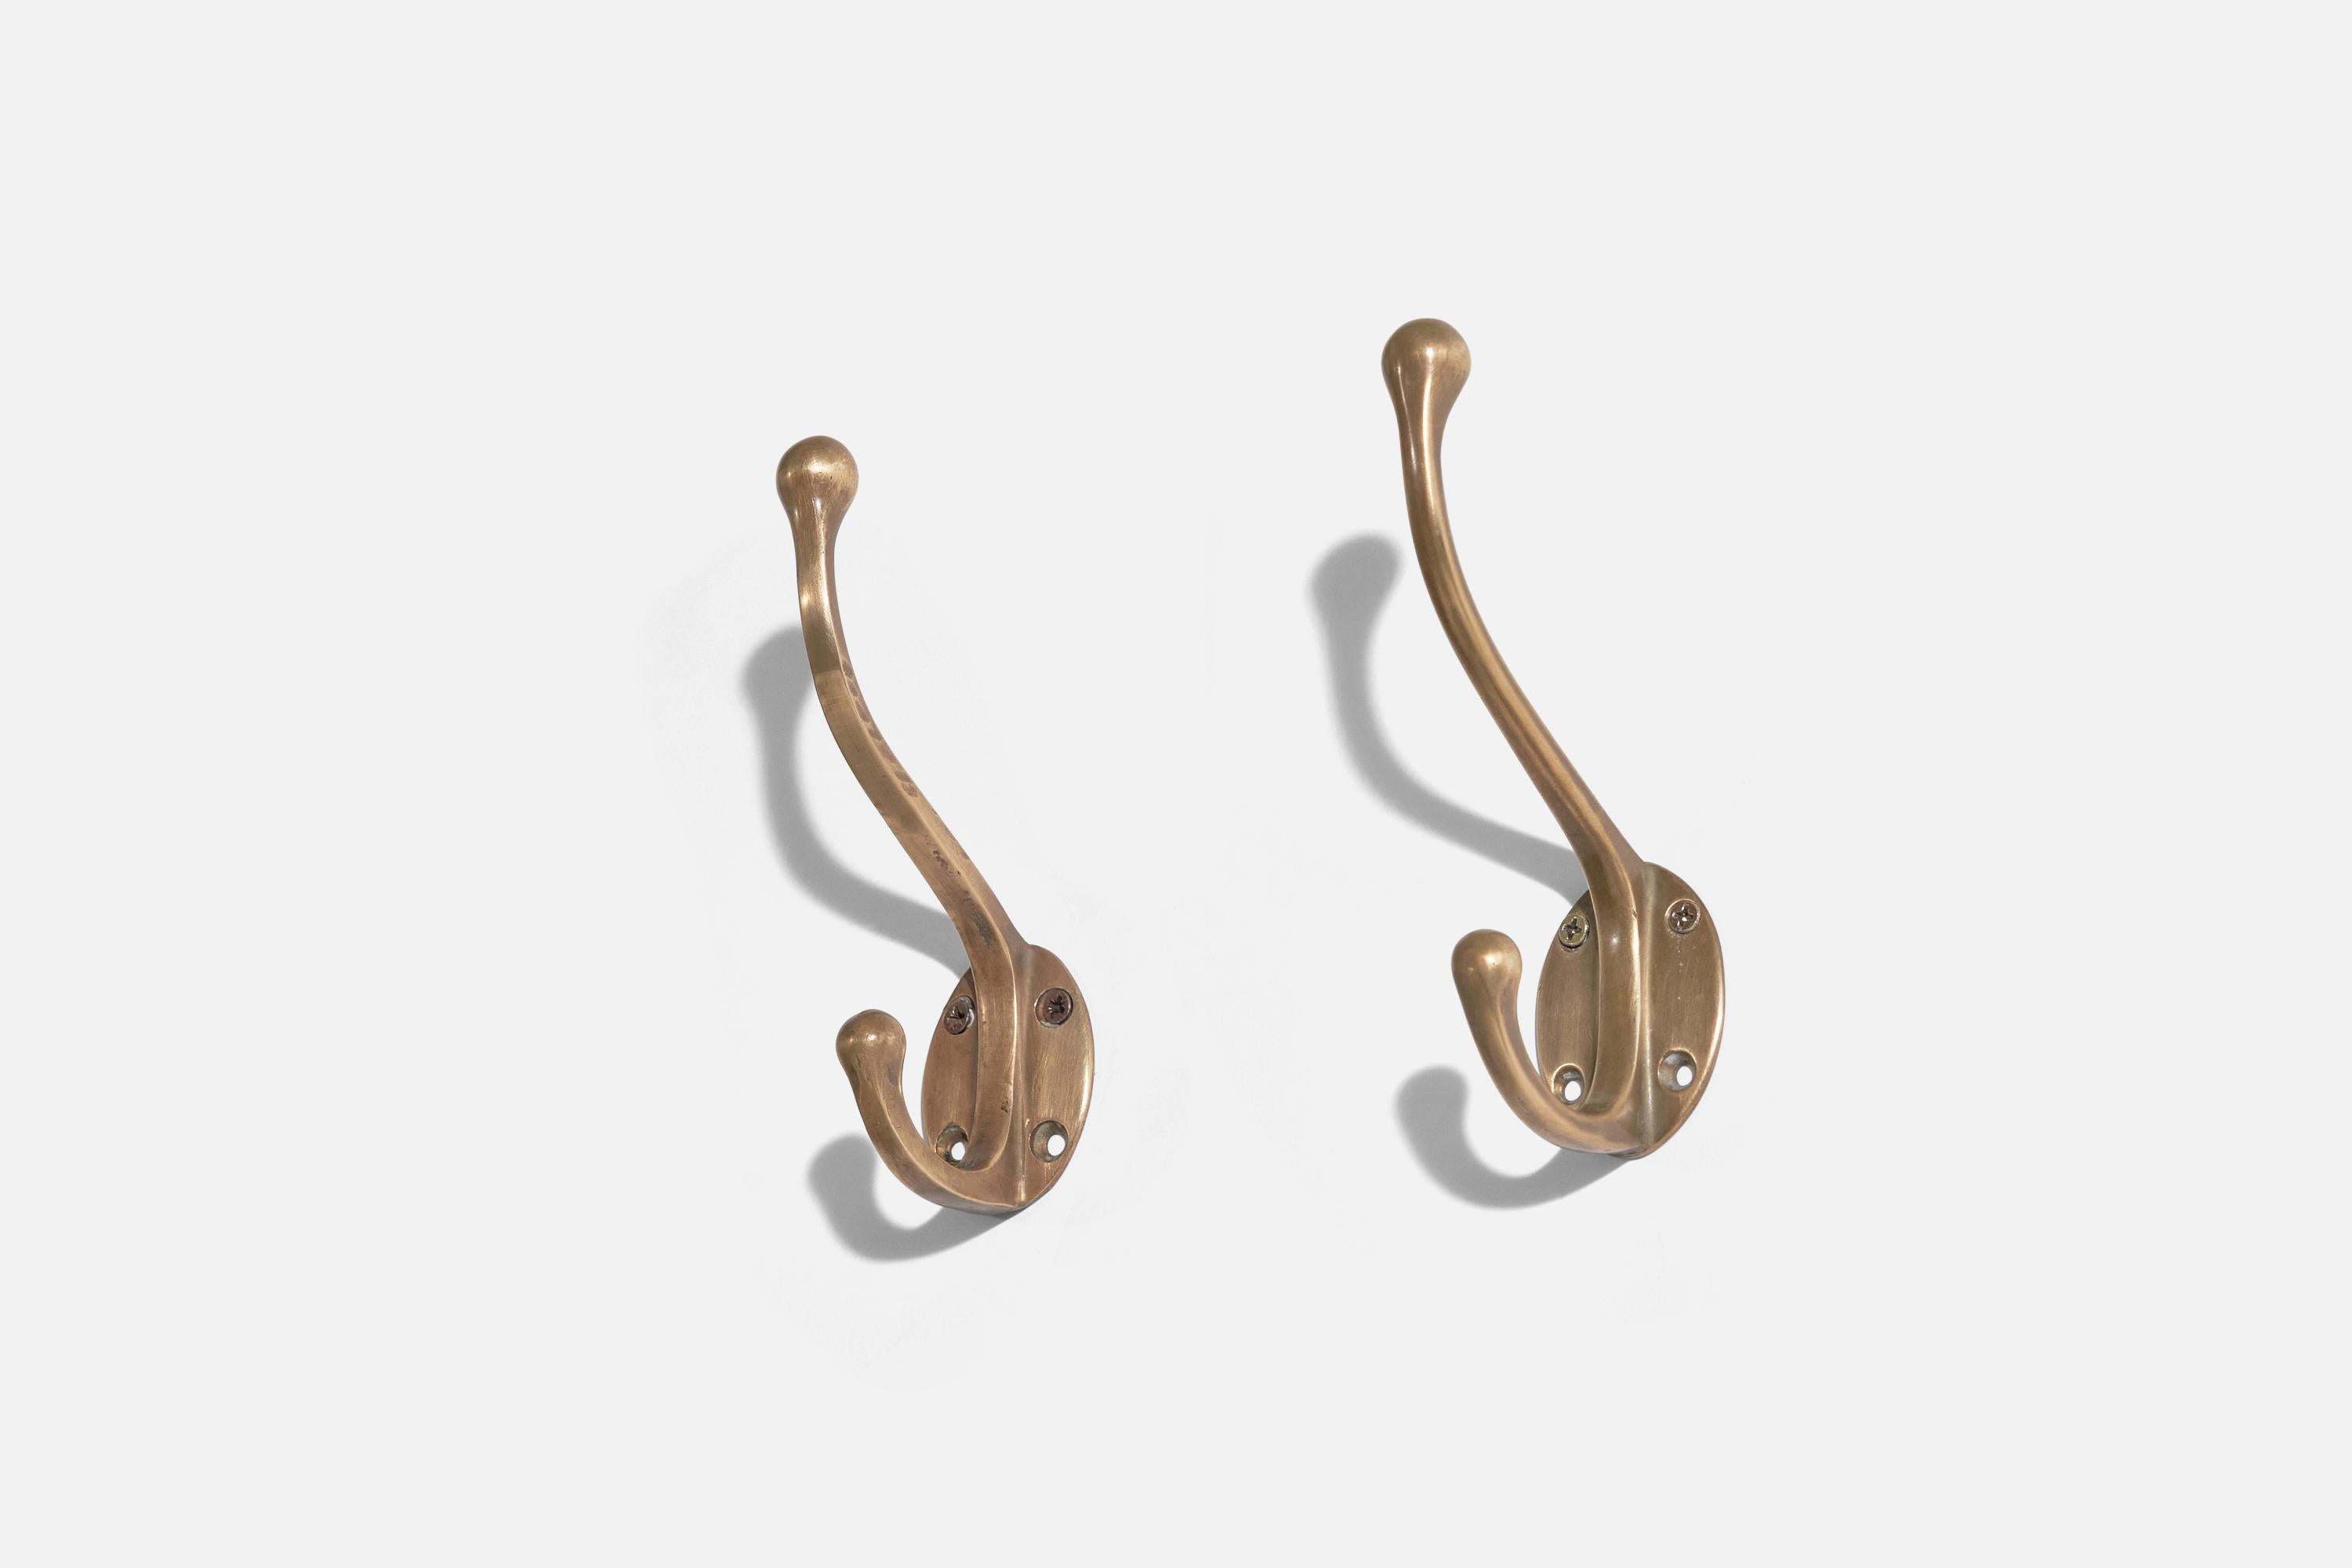 A pair of brass coat hangers, designed and produced by an Italian designer, Italy, 1940s.